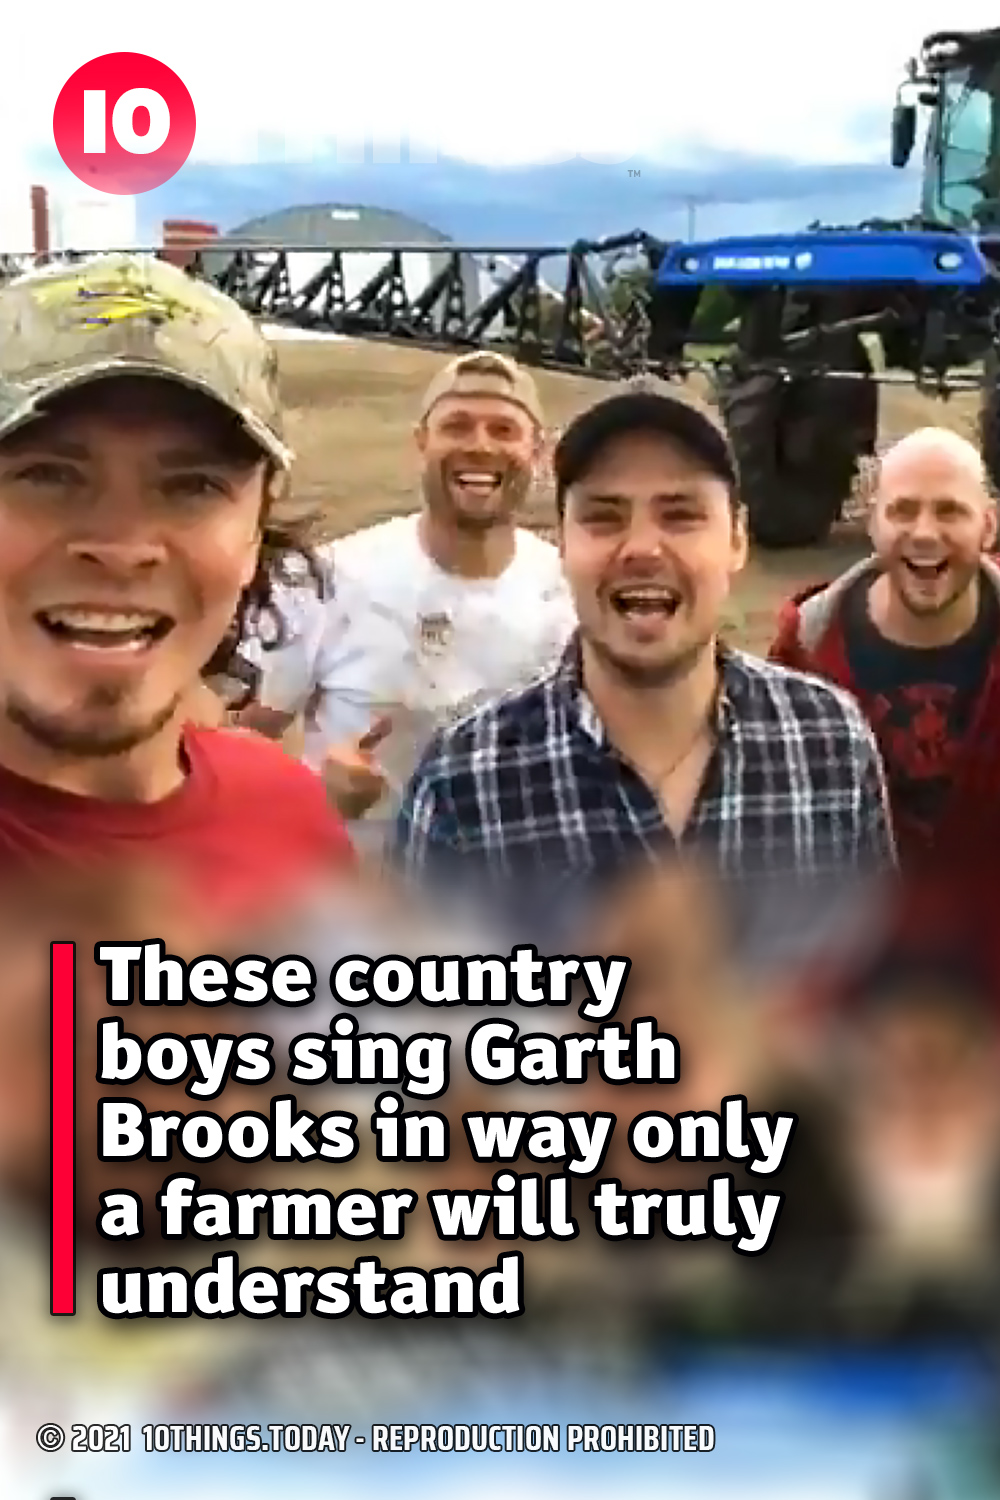 These country boys sing Garth Brooks in way only a farmer will truly understand